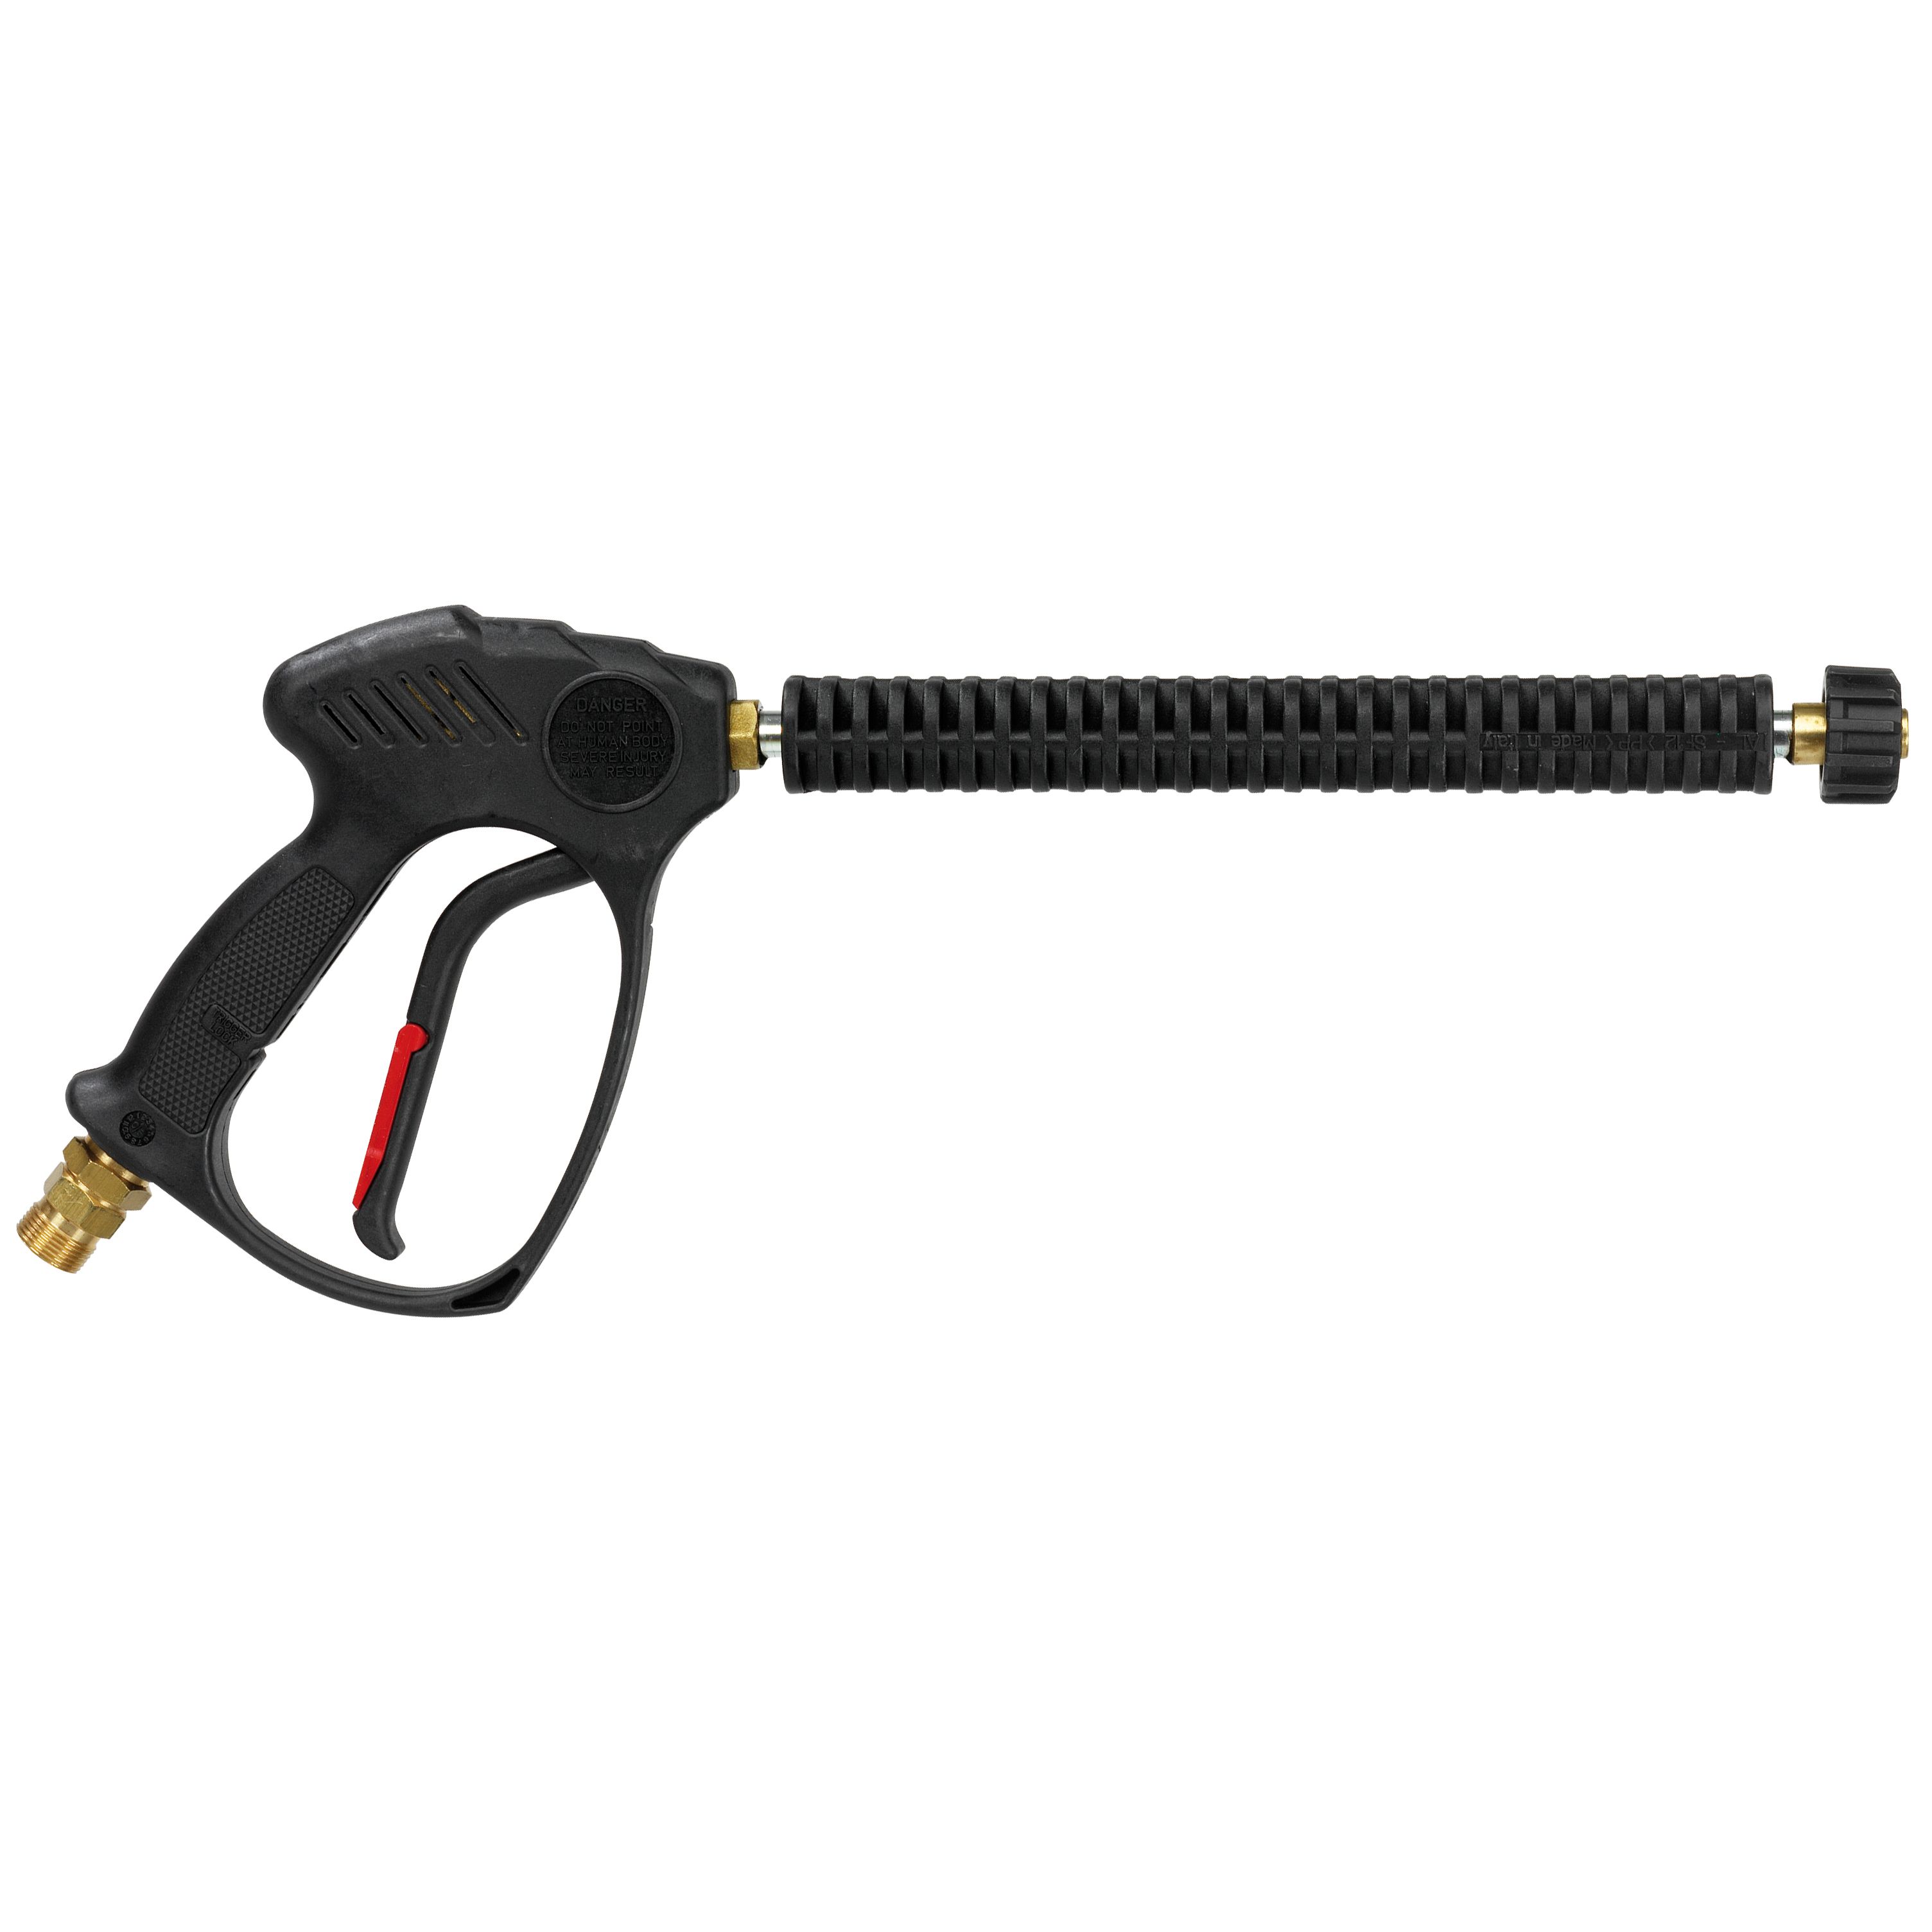 Pressure Wash Accessories   Trigger Guns With Extensions